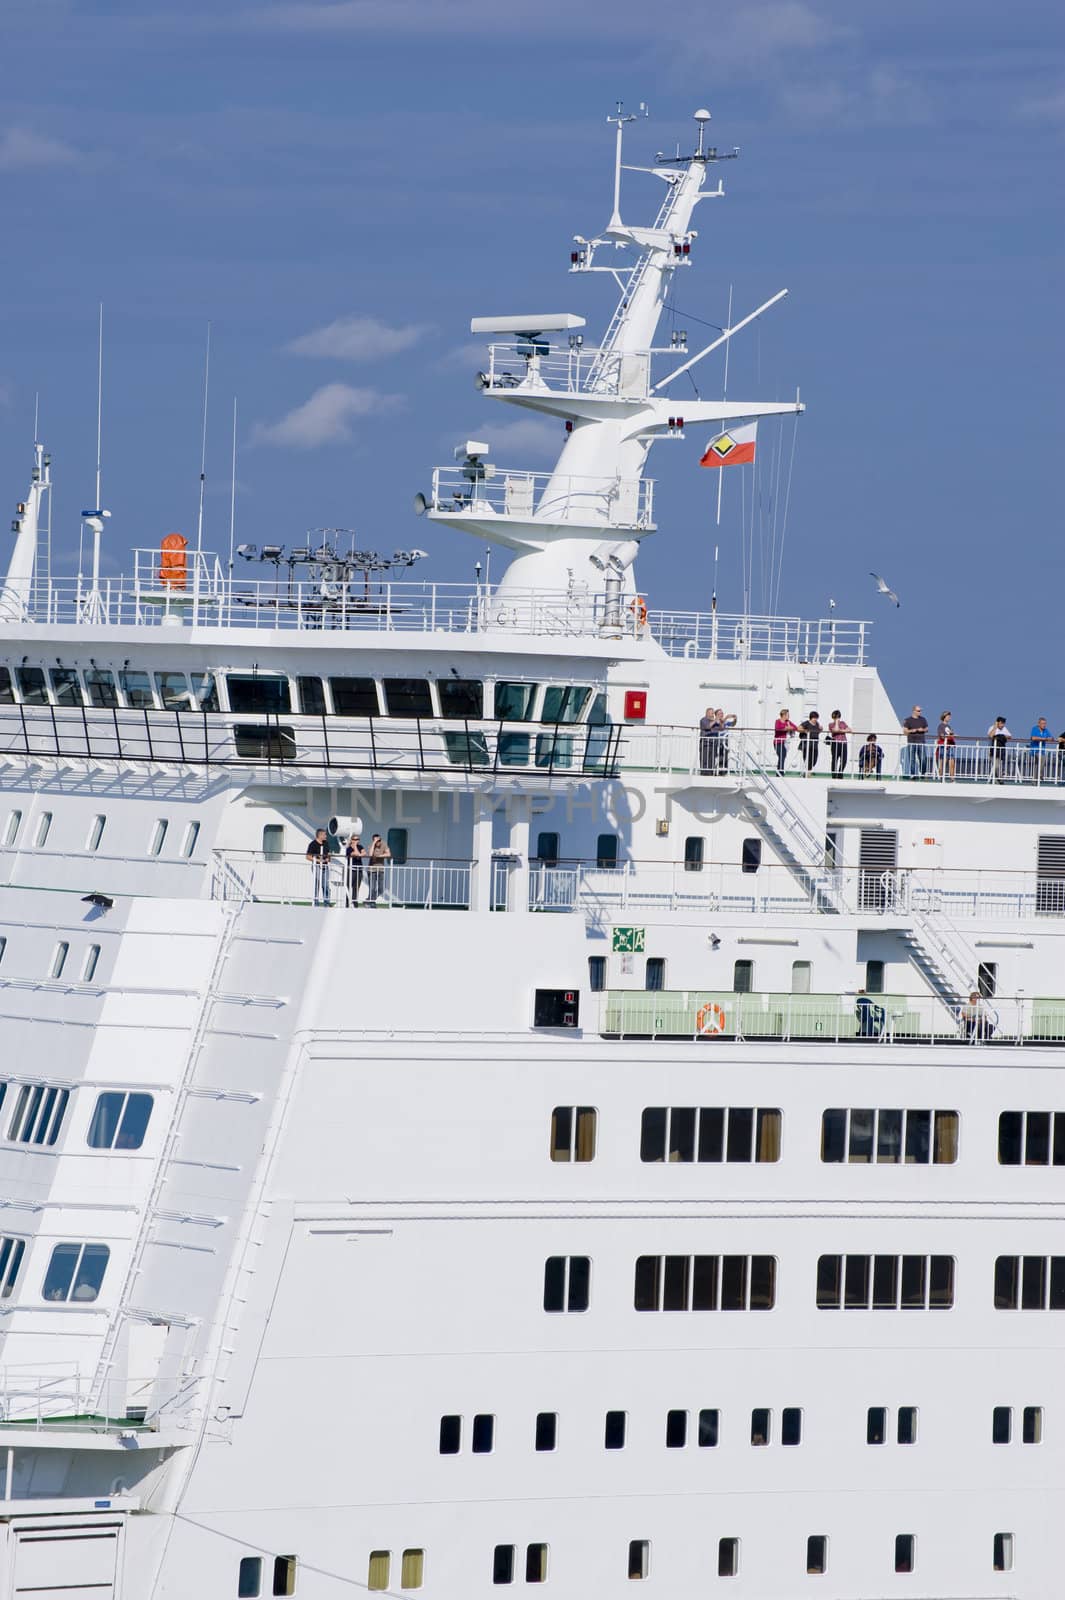 The part of large white cruise ship